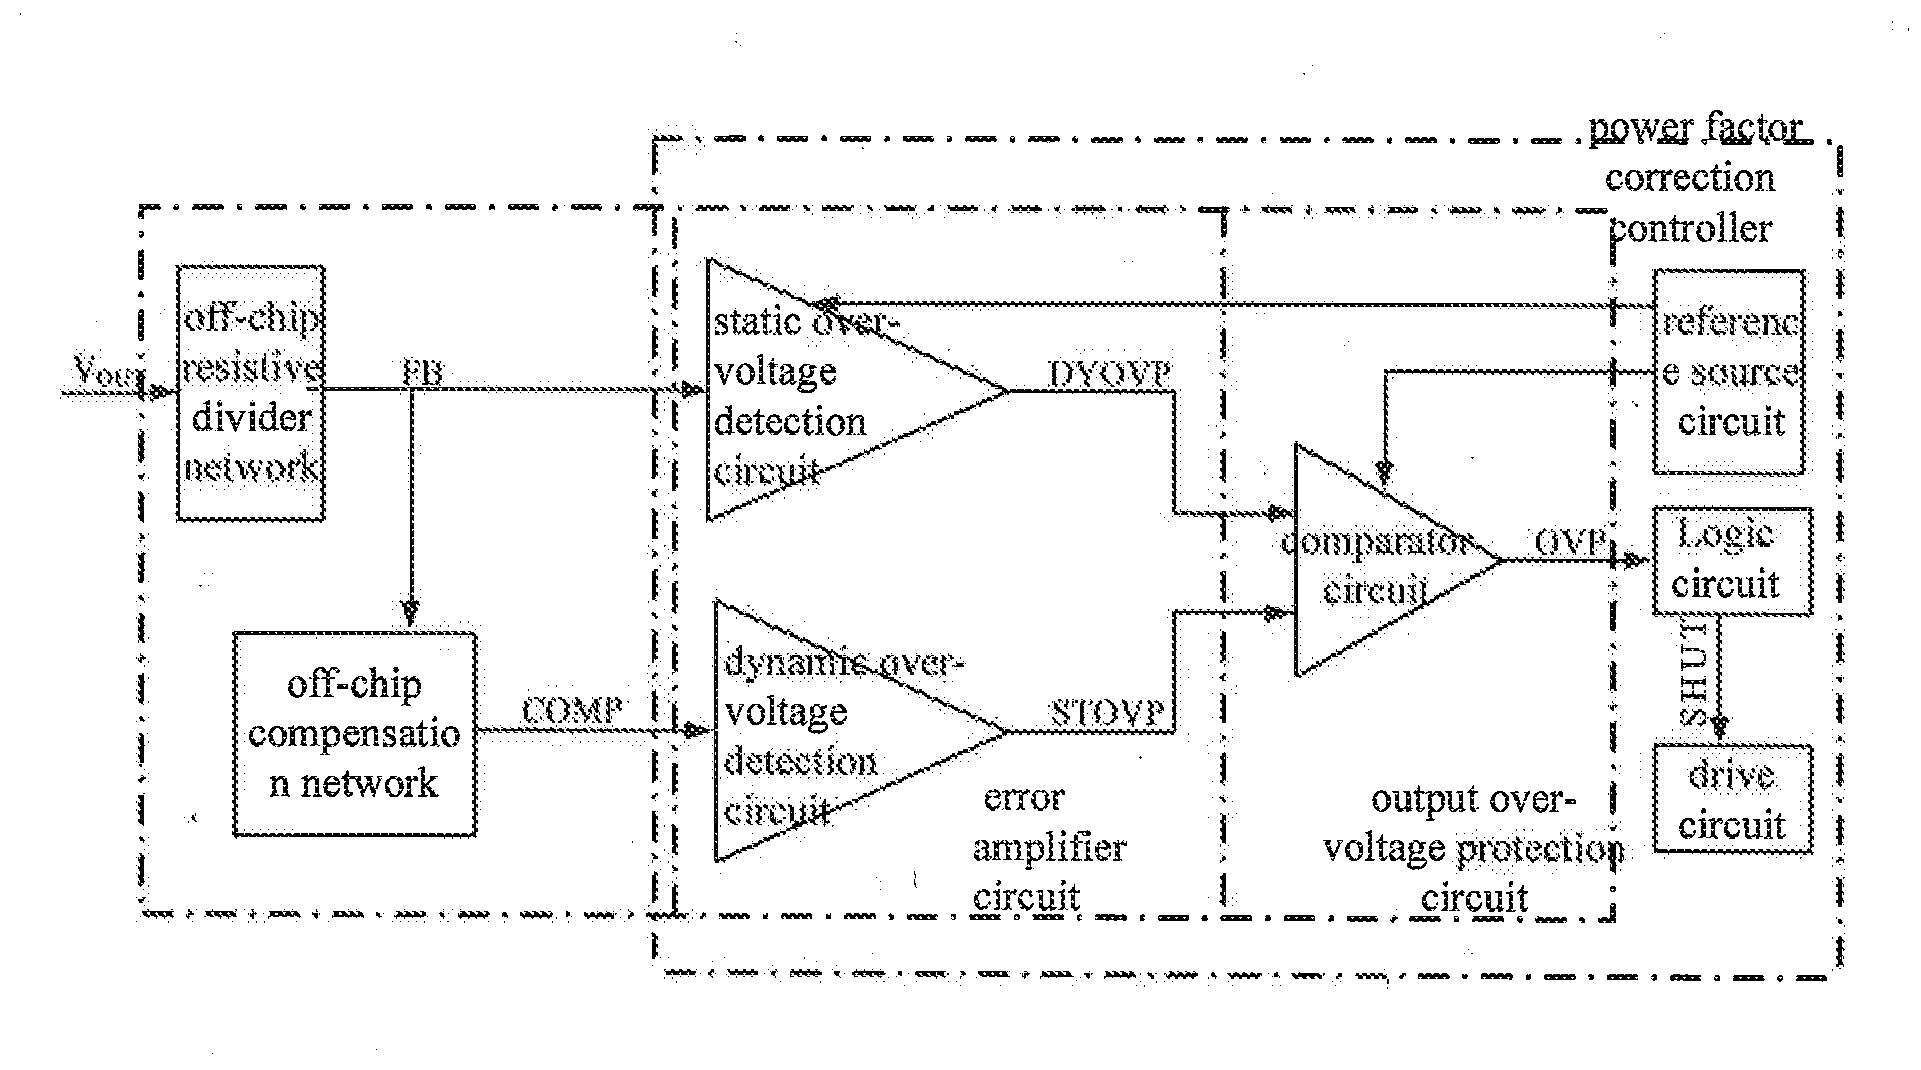 Output over-voltage protection circuit for power factor correction